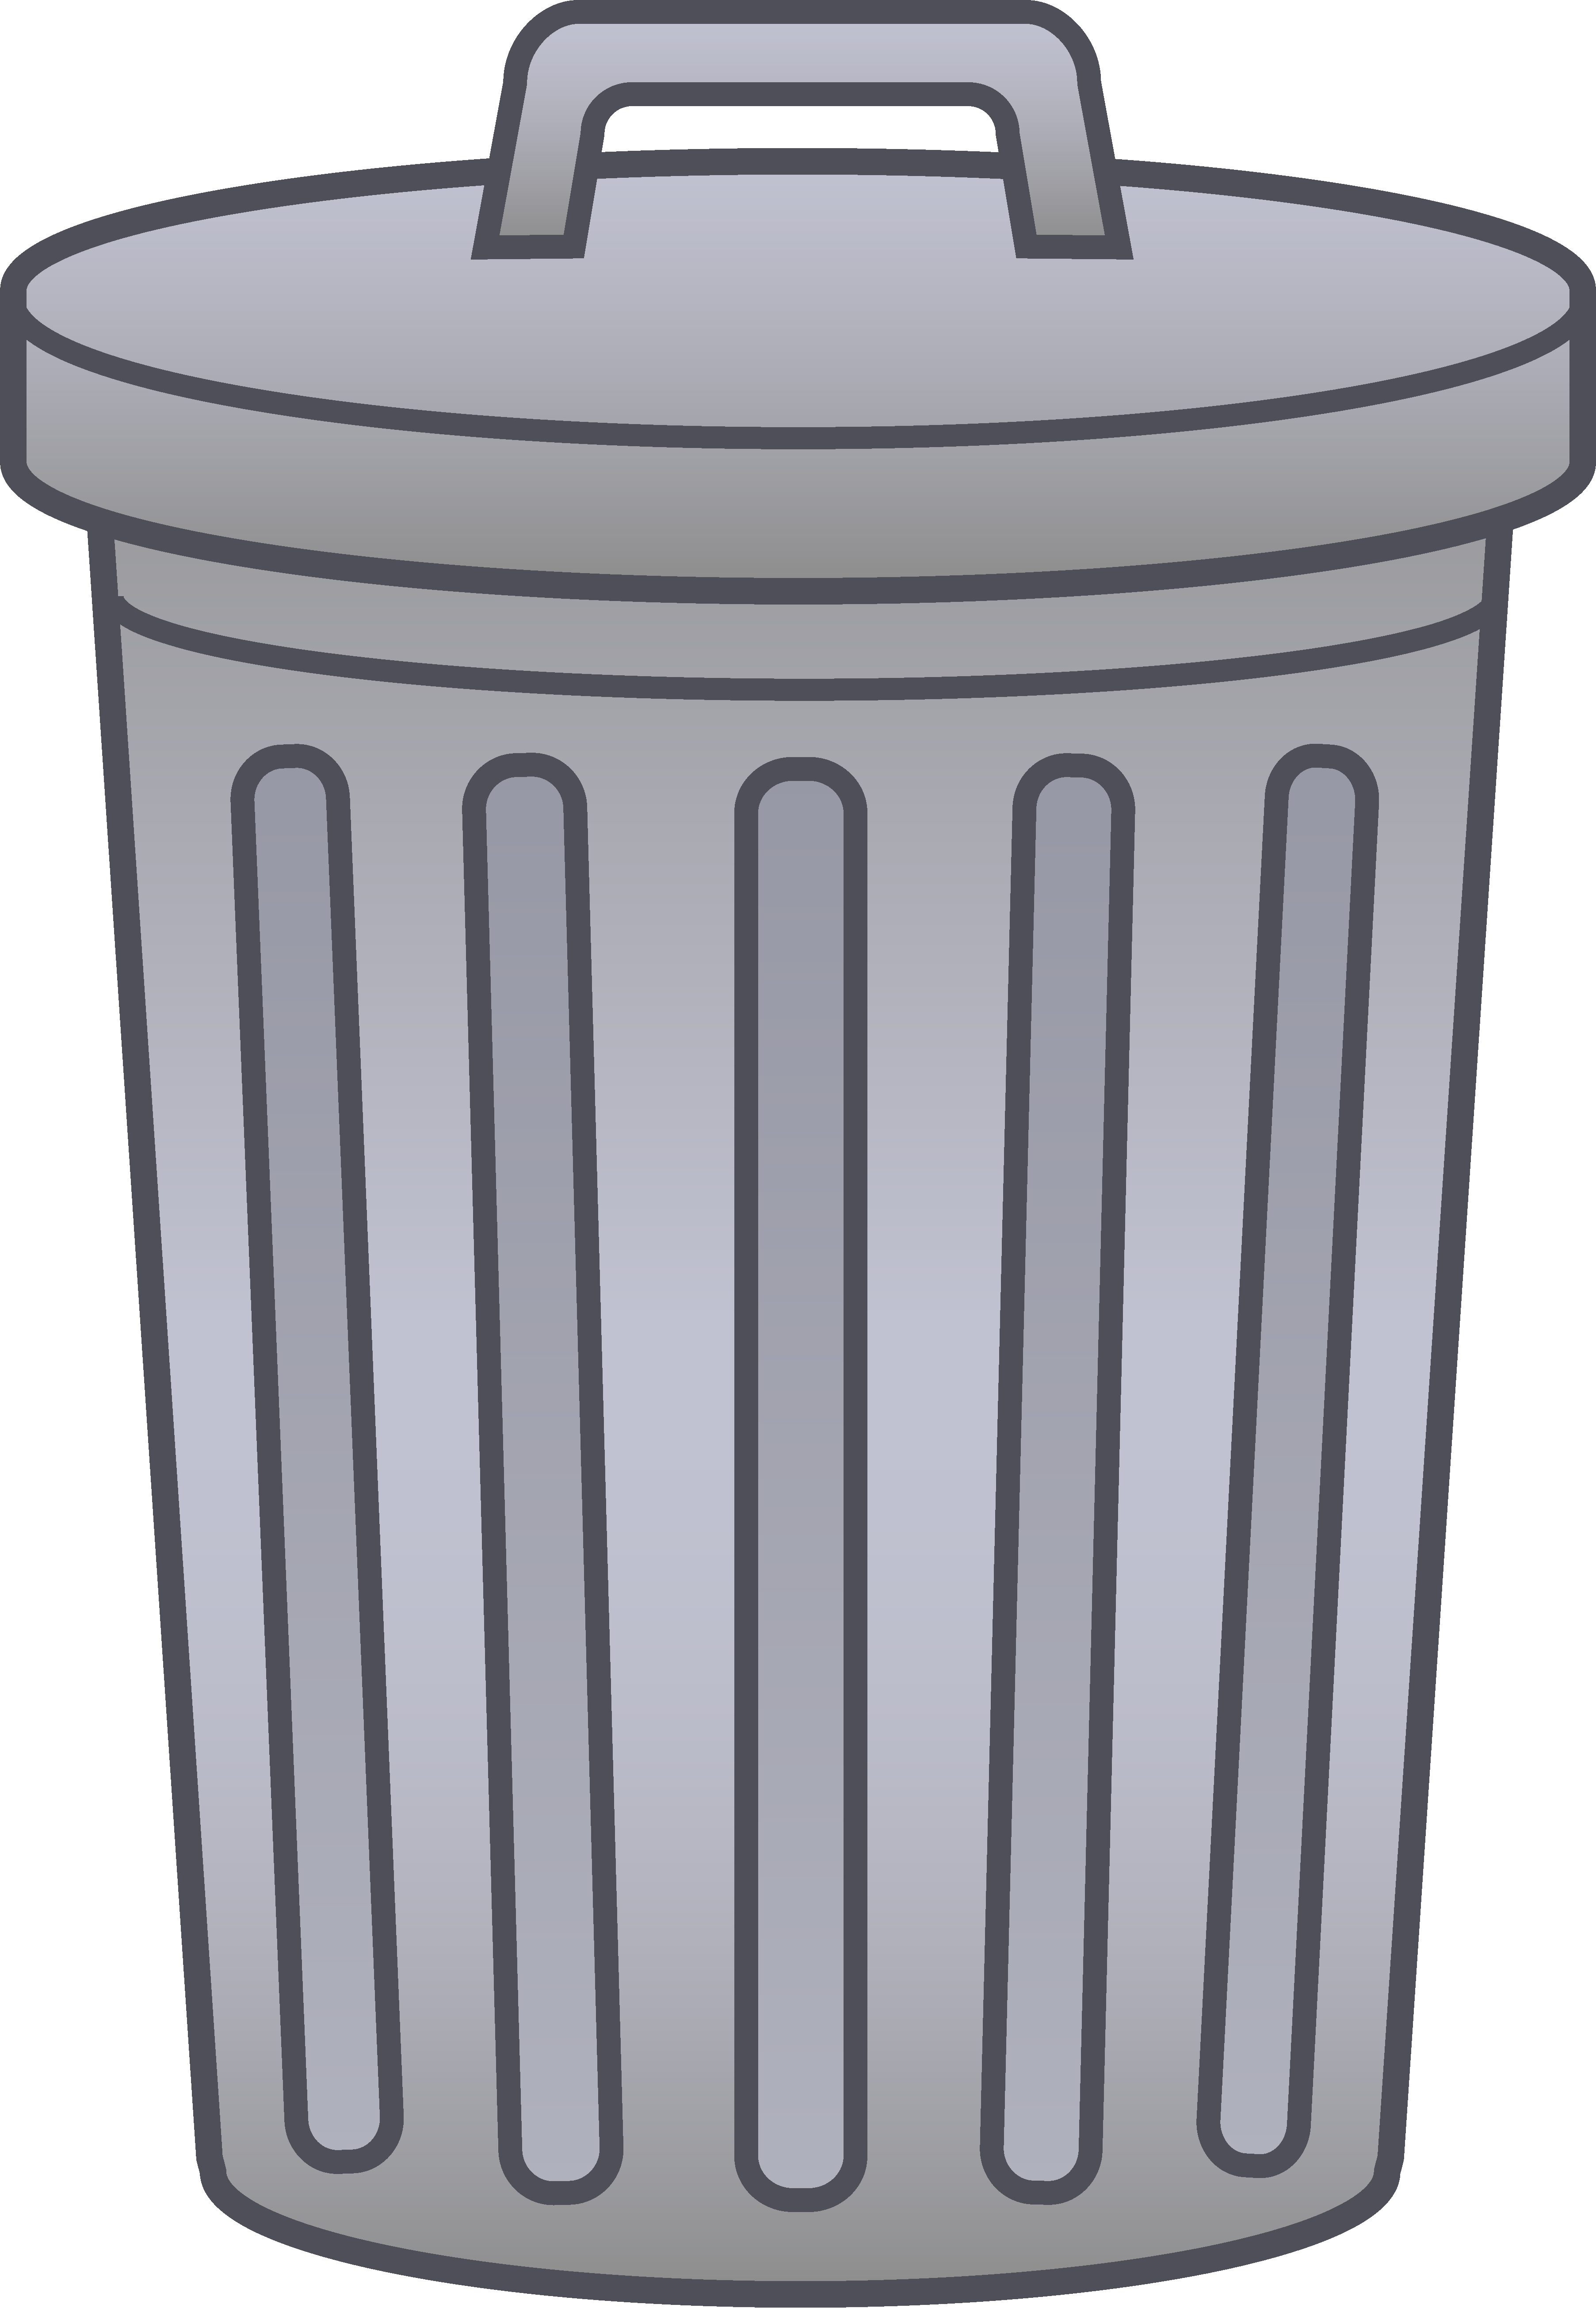 Garbage Can Pictures 